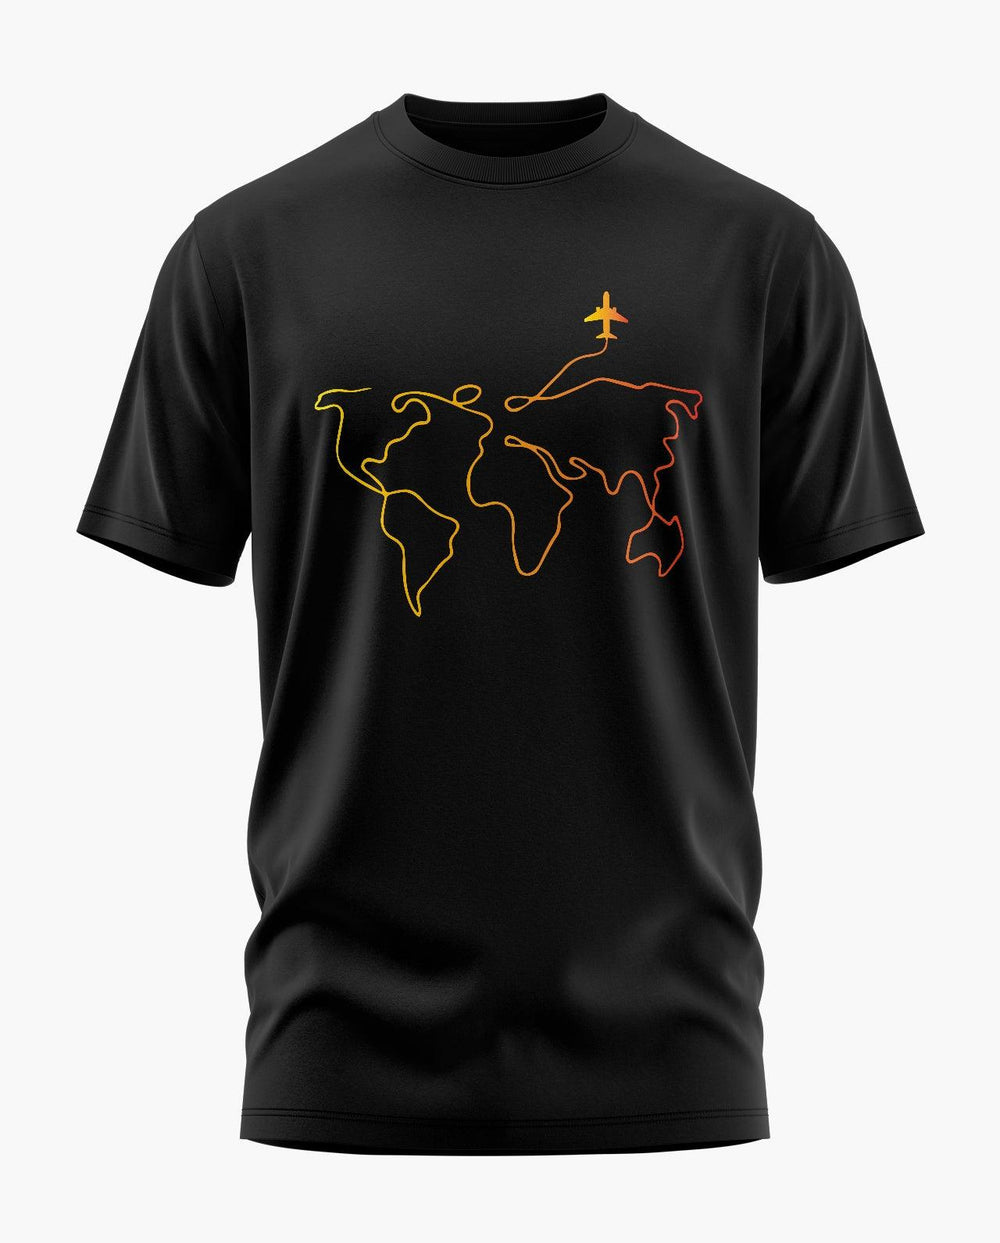 Travelling Around The Earth T-Shirt - Aero Armour